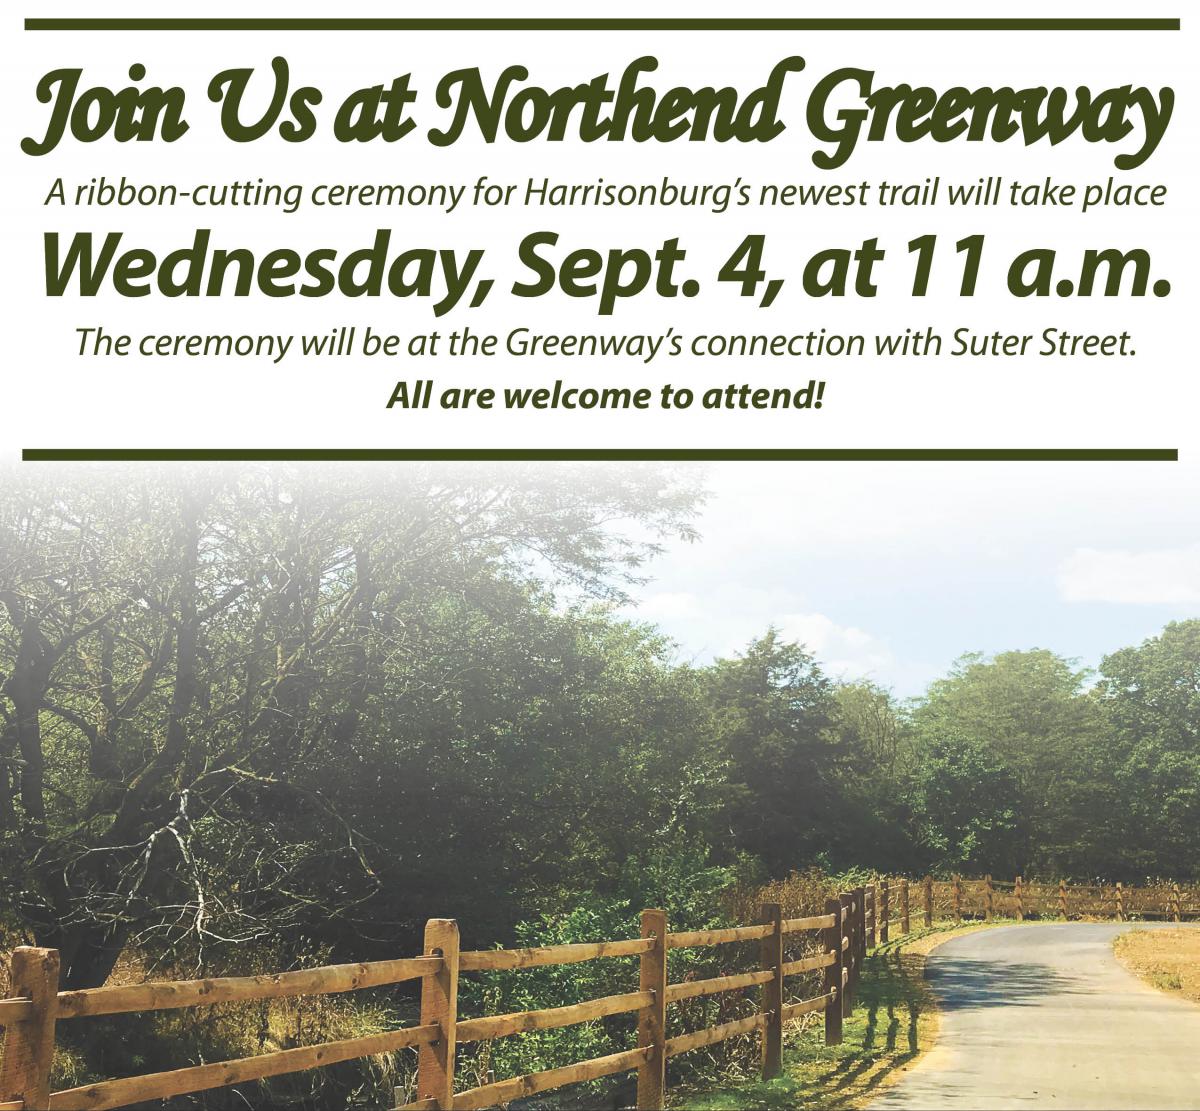 Northend Greenway Ribbon Cutting Ceremony